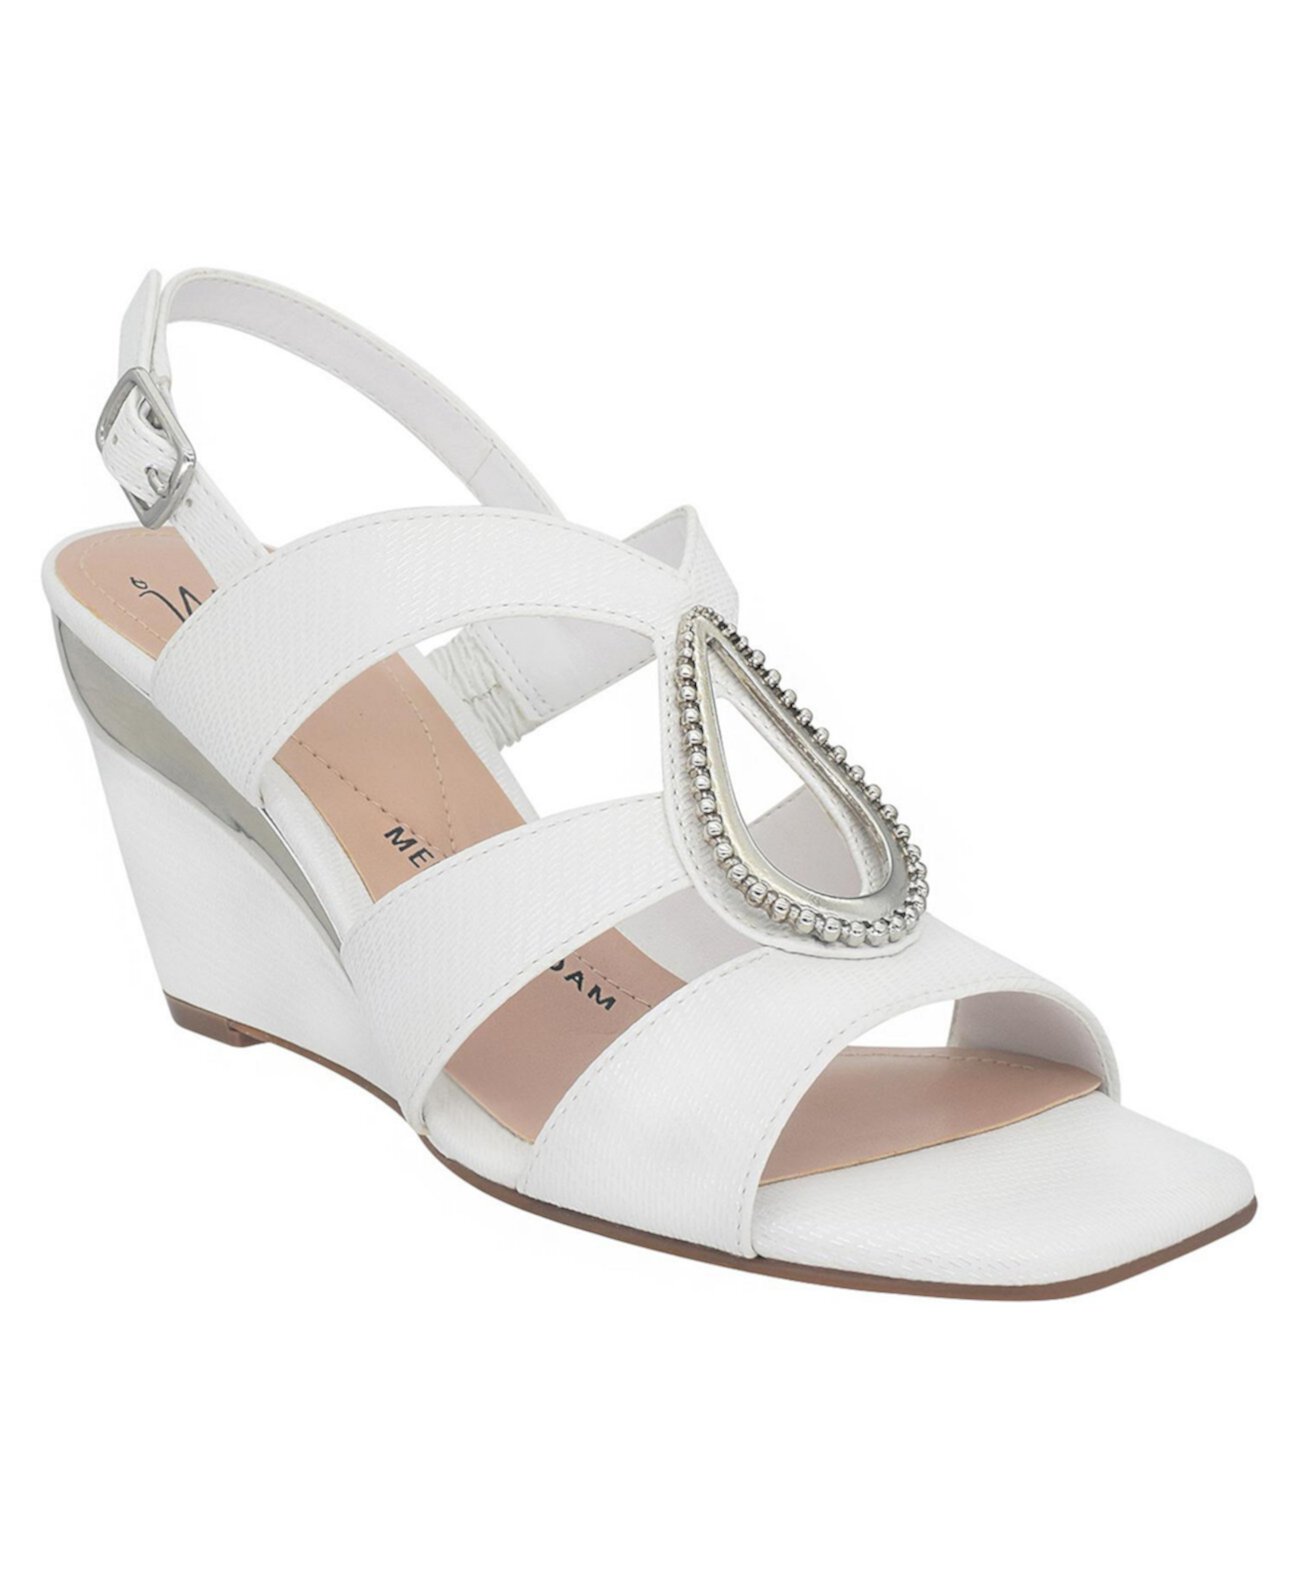 Women's Violette Ornamented Wedge Sandals Impo